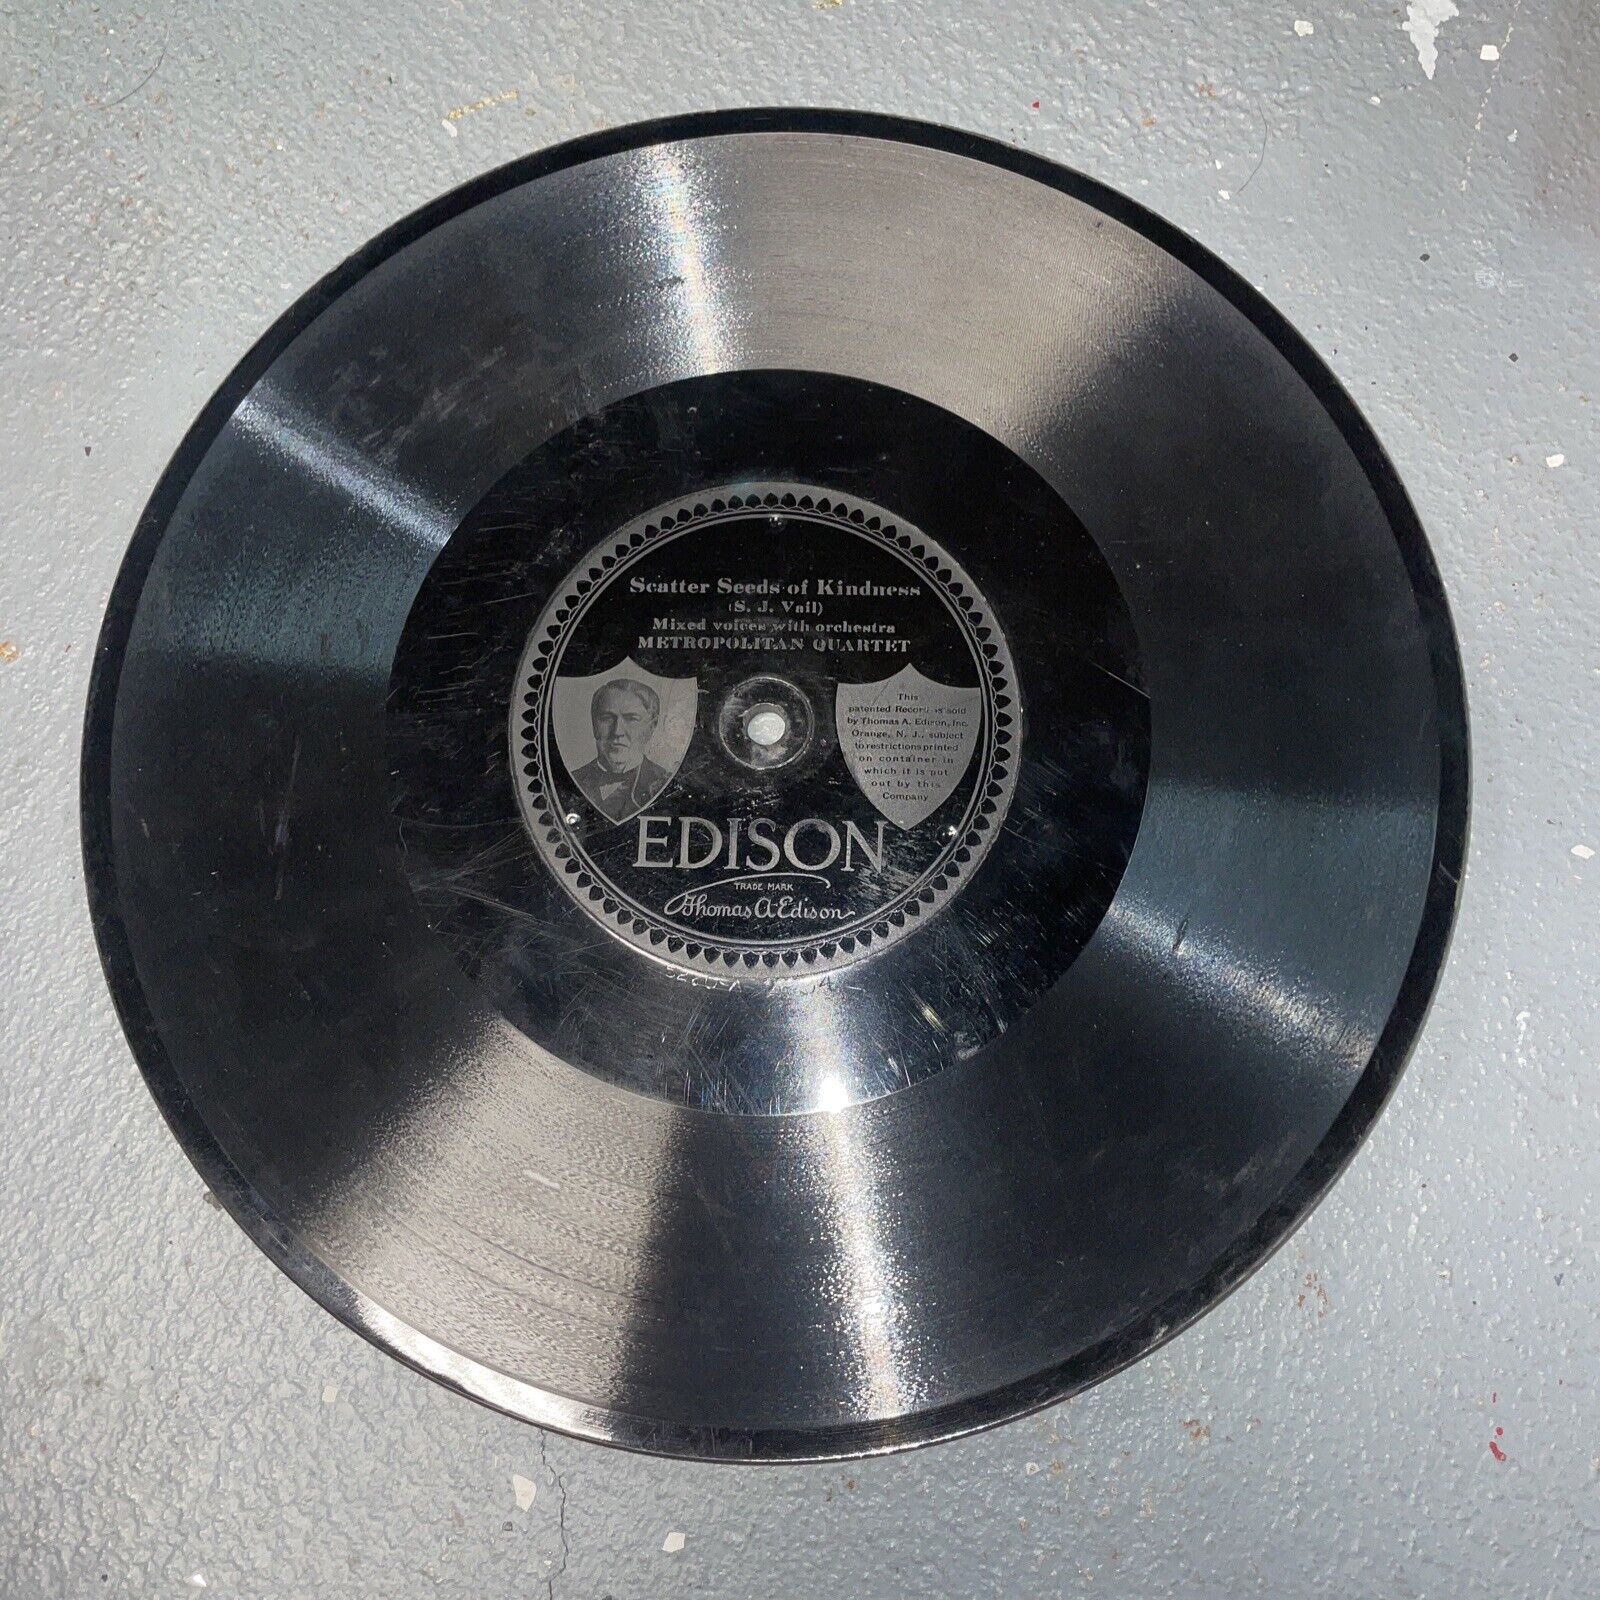 Early Edison Diamond Disc Record Scatter Seeds Of Kindness Impressed Label